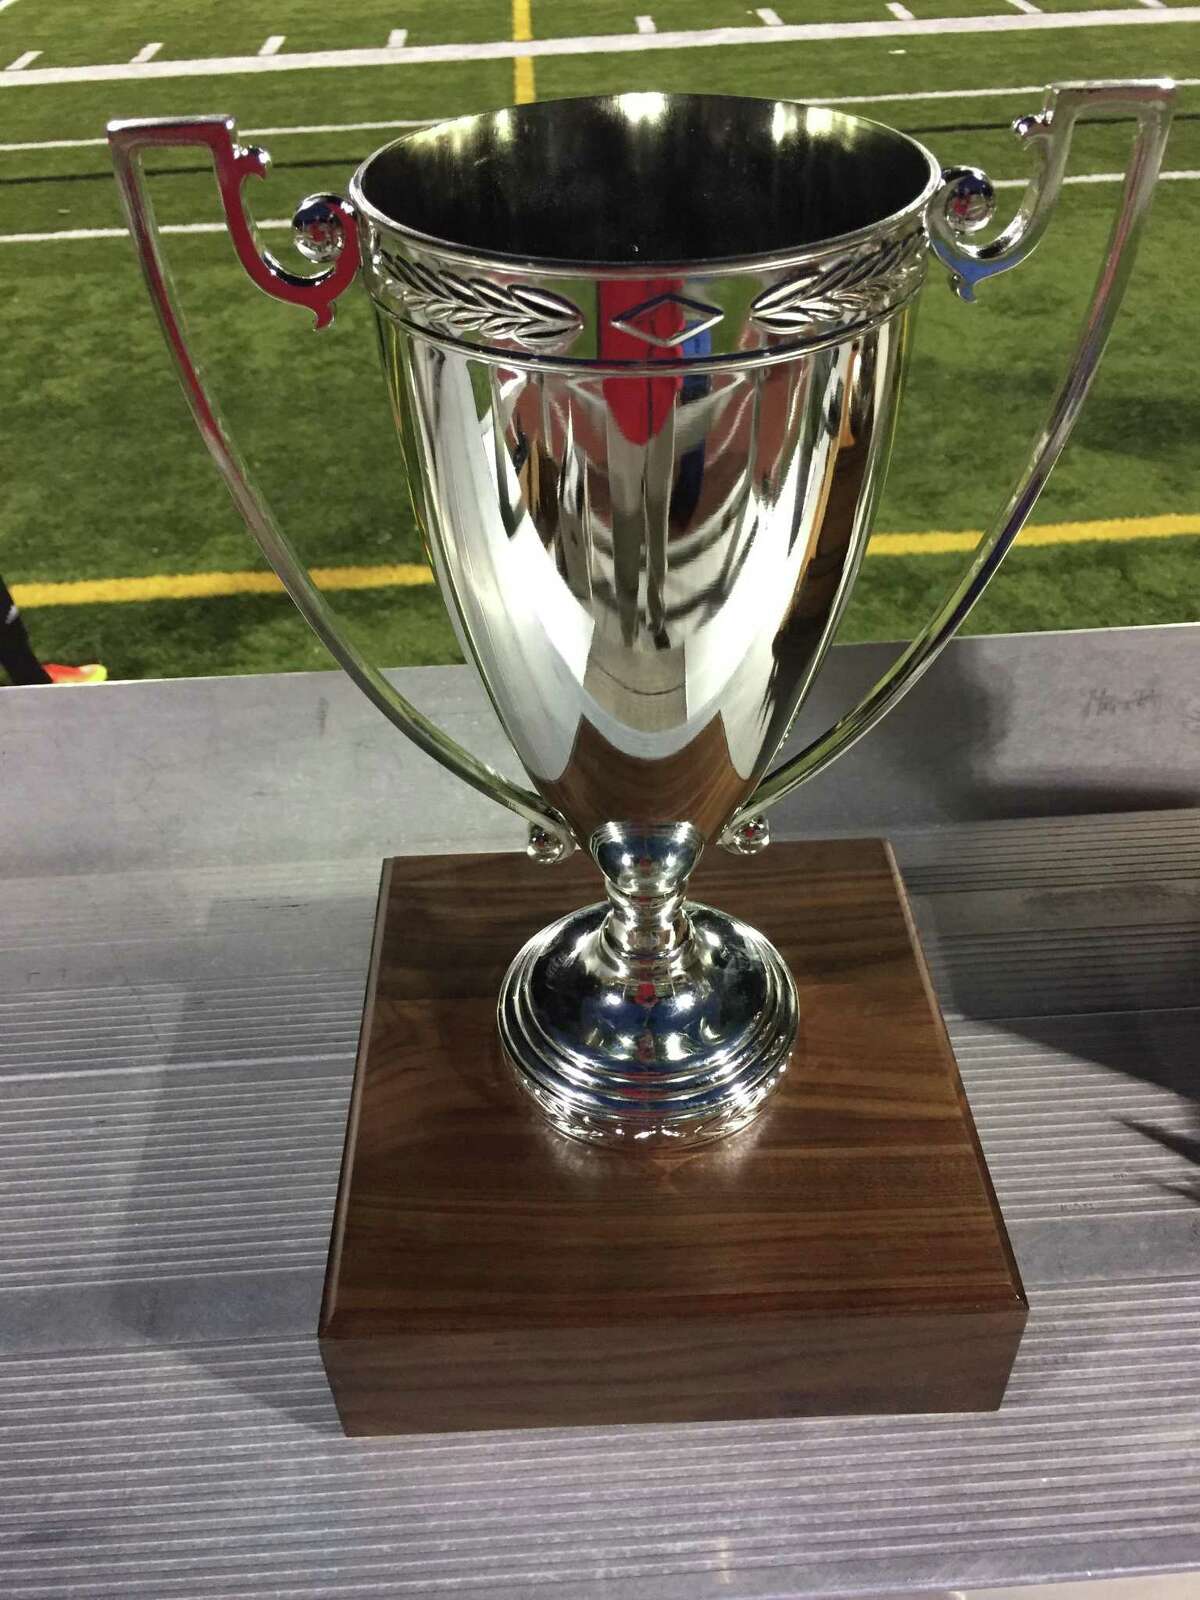 The Fairfield United Cup, created by the Fairfield United Soccer Association, given to the winner of the Warde-Ludlowe girls’ soccer game.